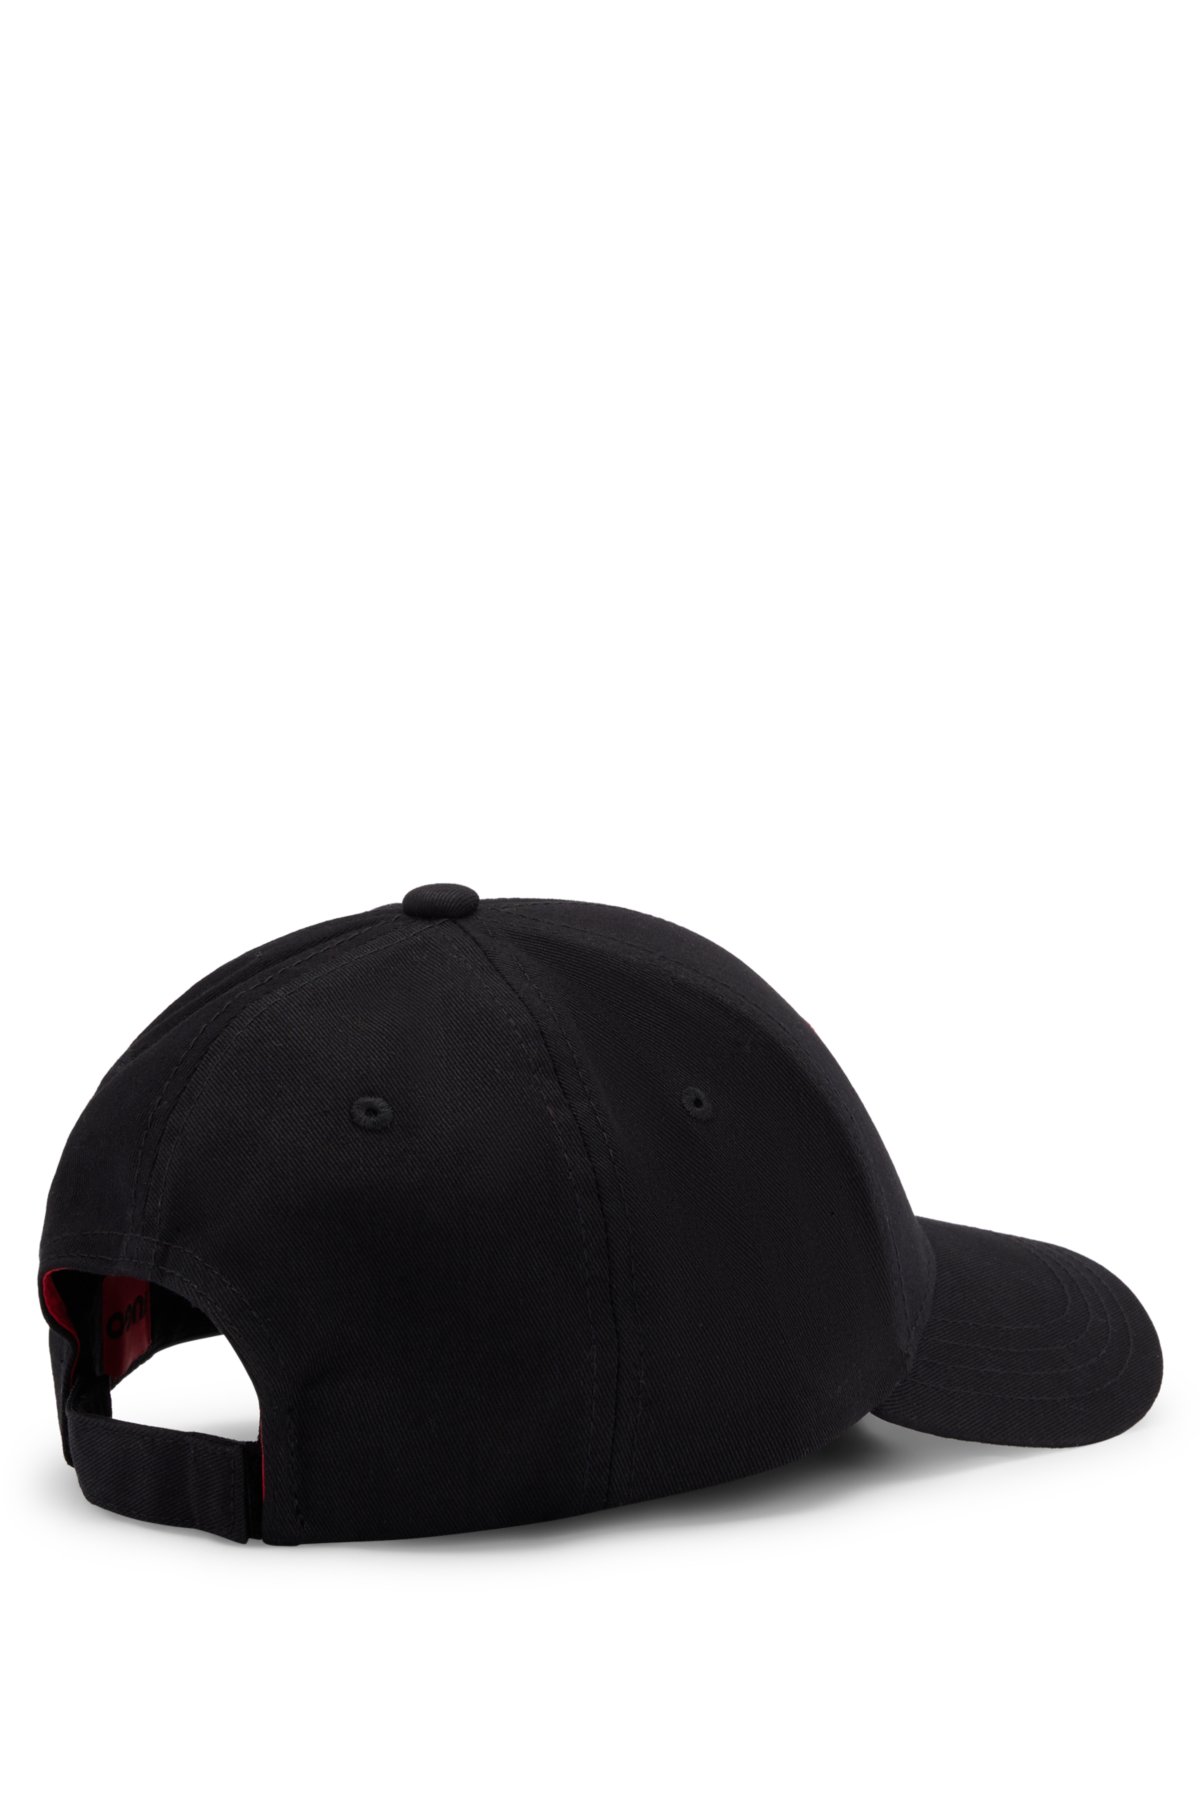 Cotton-twill cap with red logo label, Black